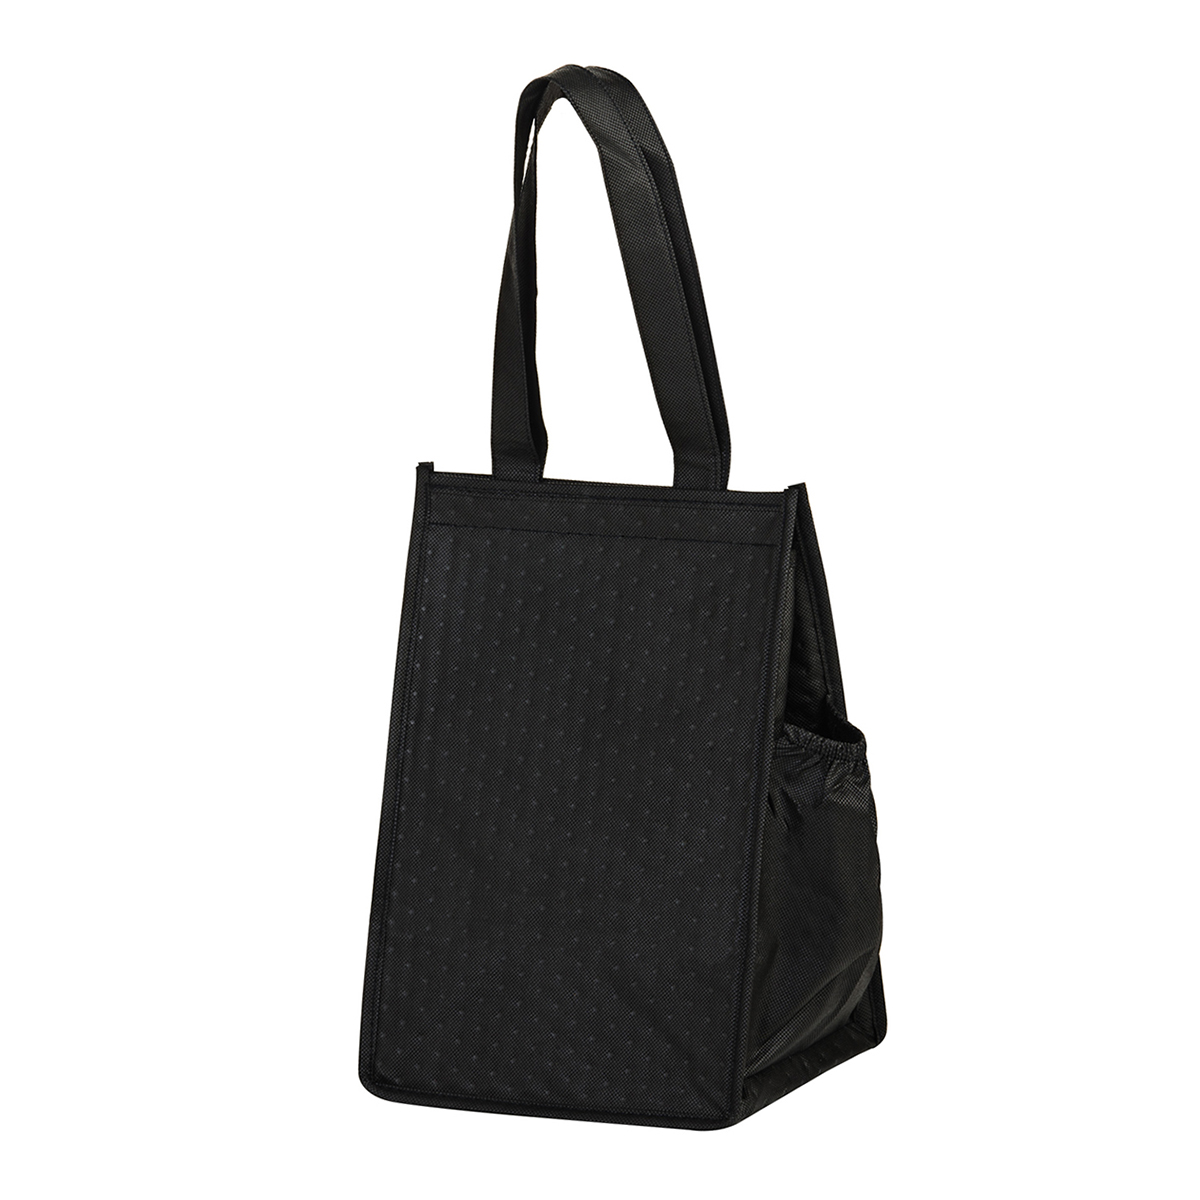 Black Insulated Lunch Bag (8"W x 7"G x 12"H)